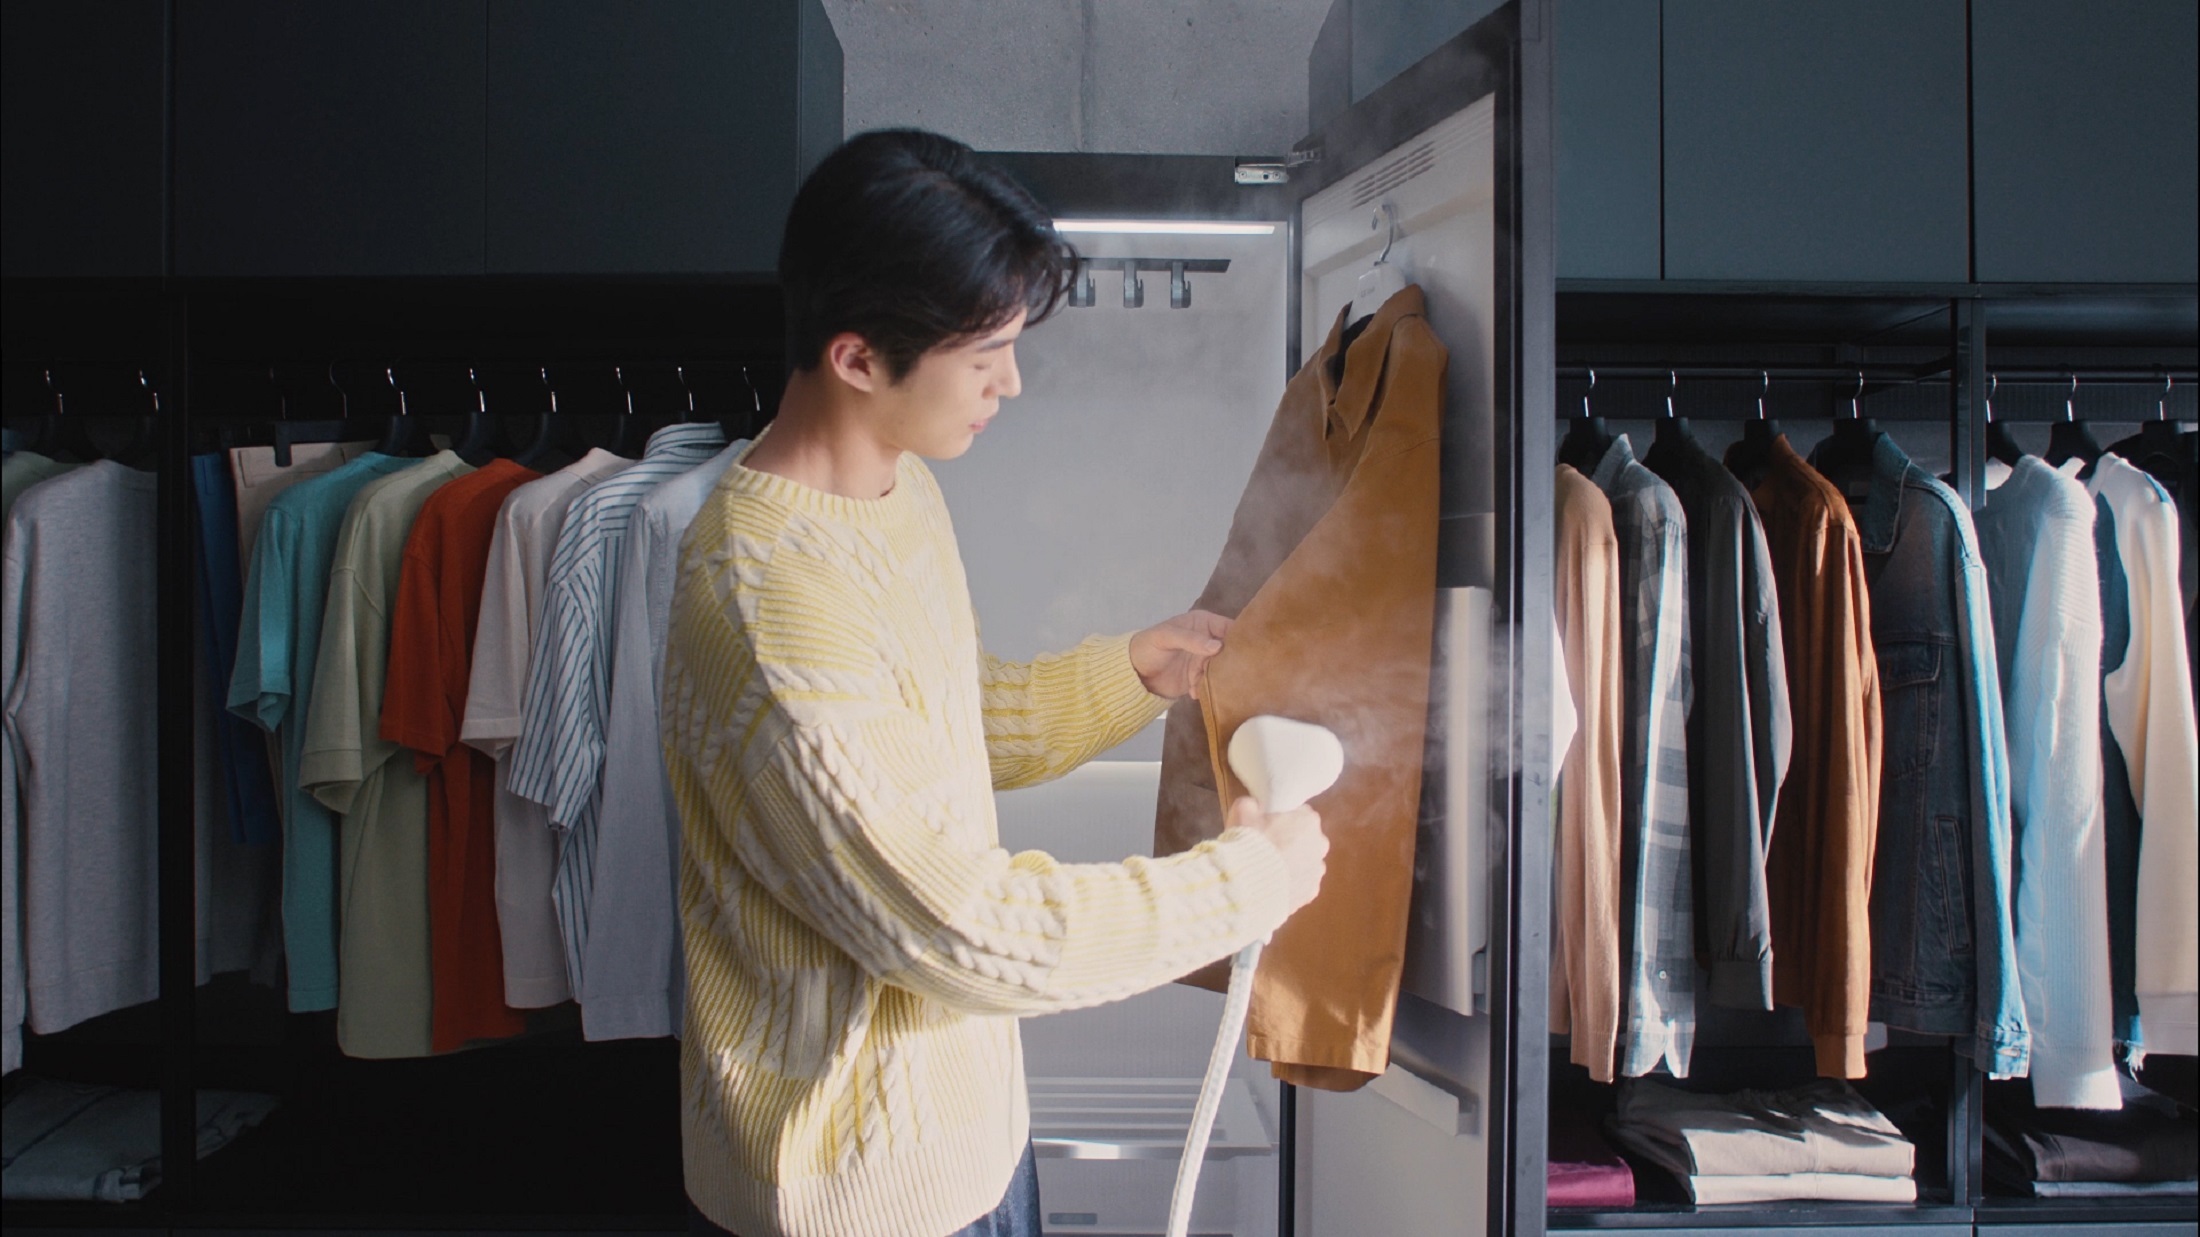 LG makes it easier for you to take care of your clothes